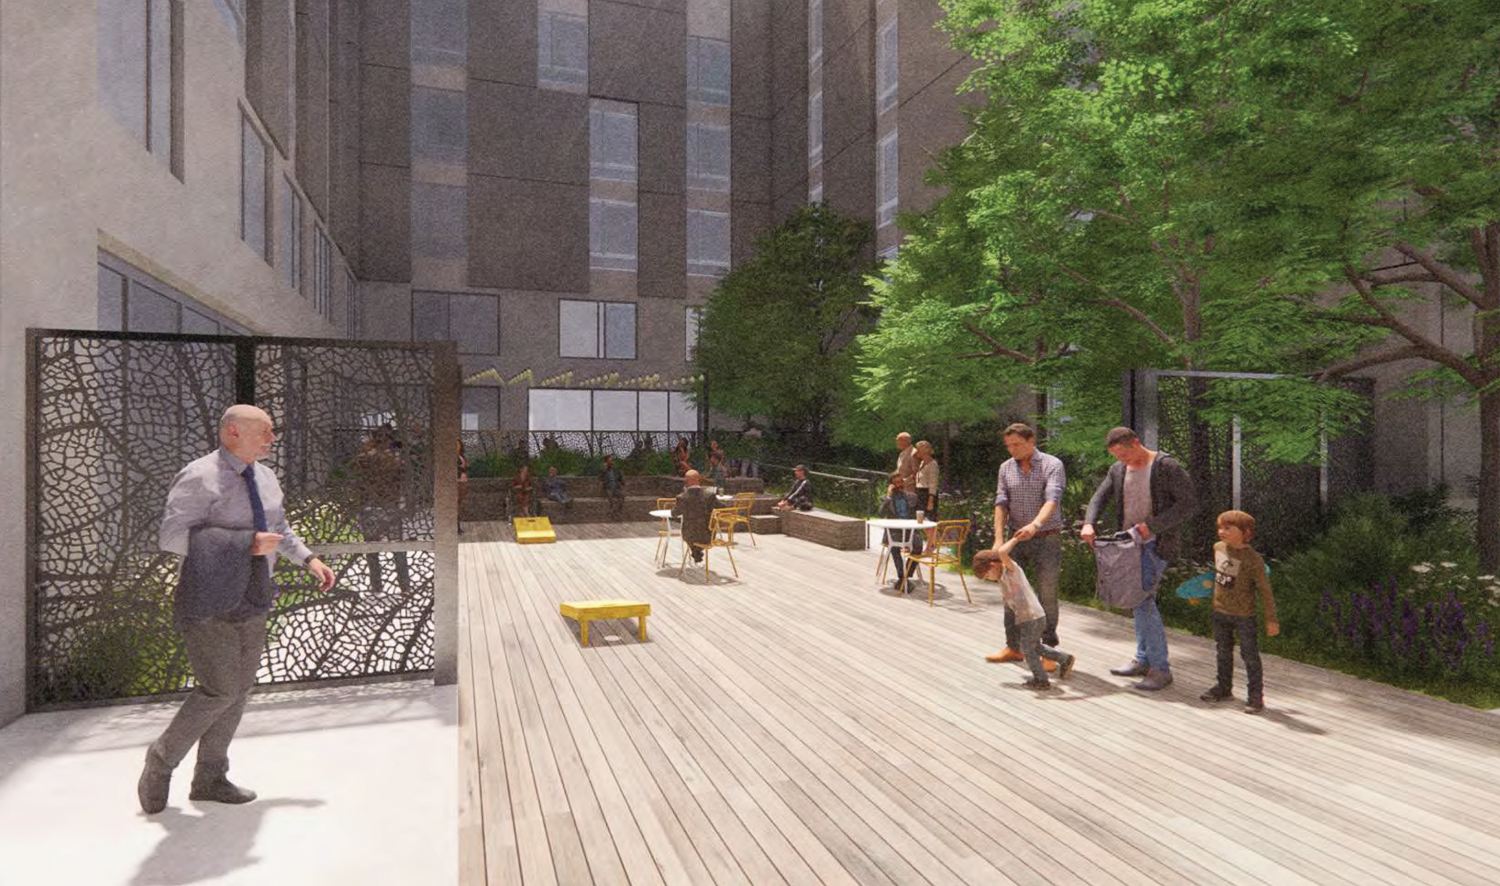 Transbay Block 2 senior courtyard, rendering by Kennerly Architecture & Planning